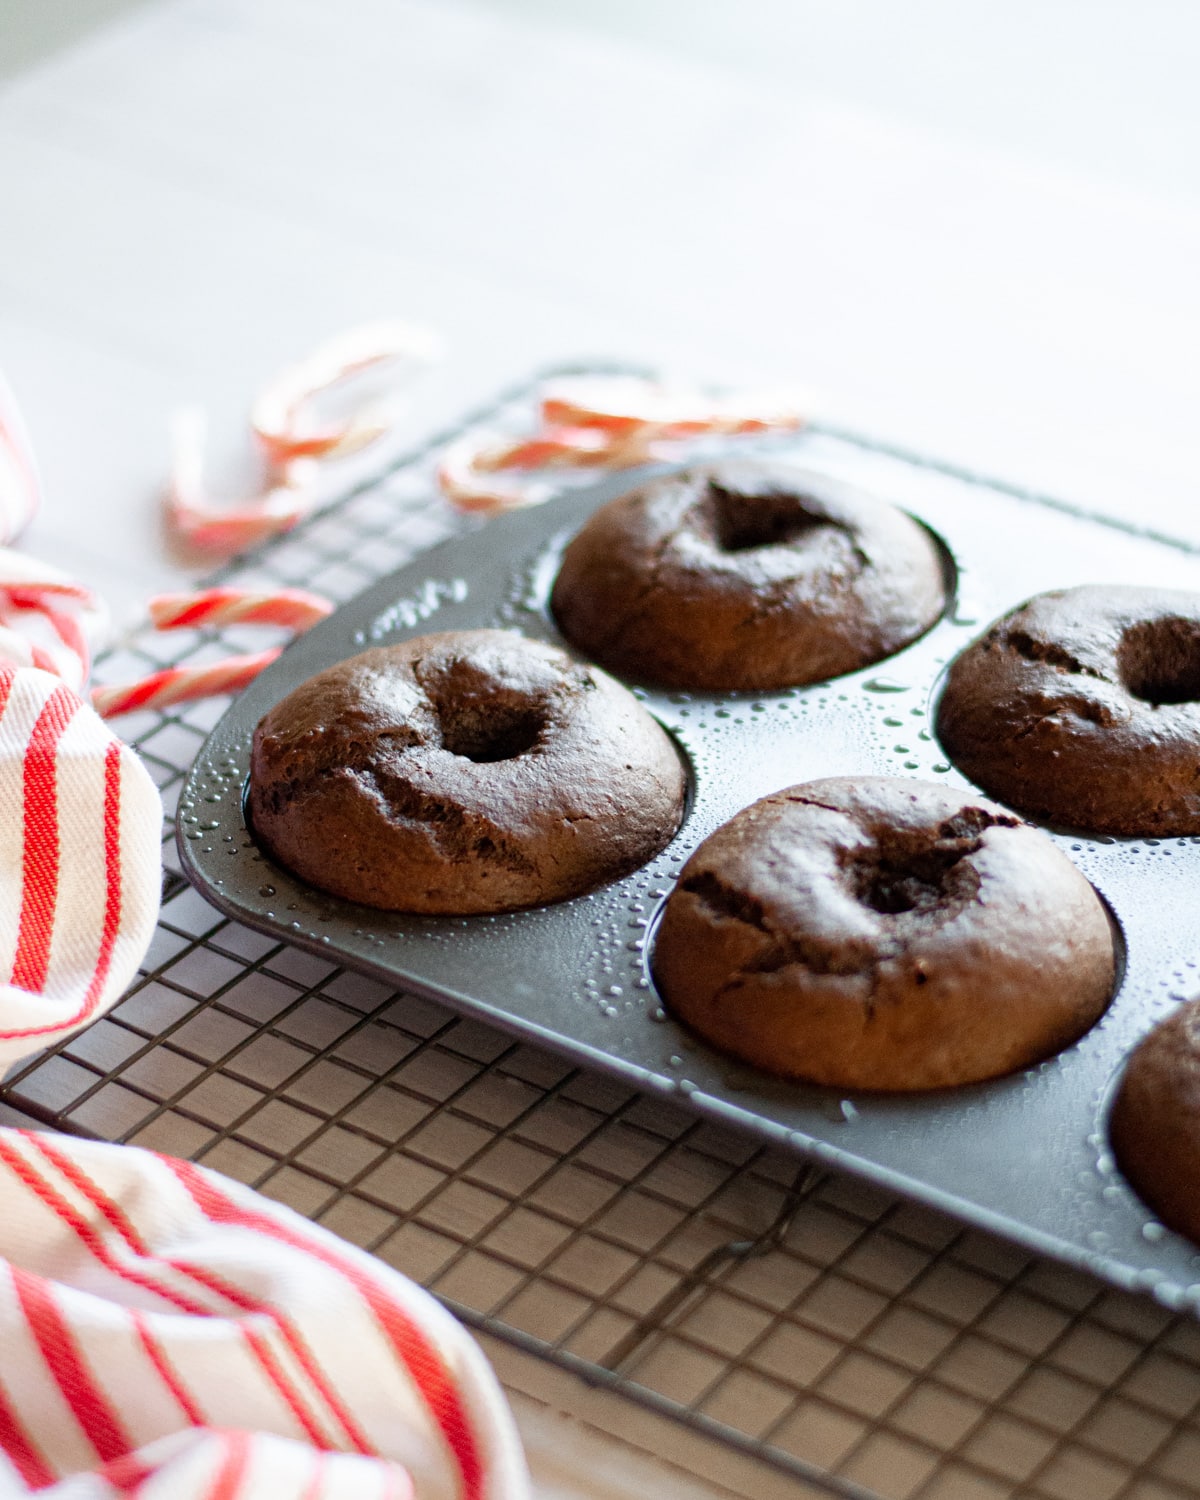 freshly baked chocolate donuts in a donut pan on a wire cooling rack. candy canes and a red and white linen sit near the pan.